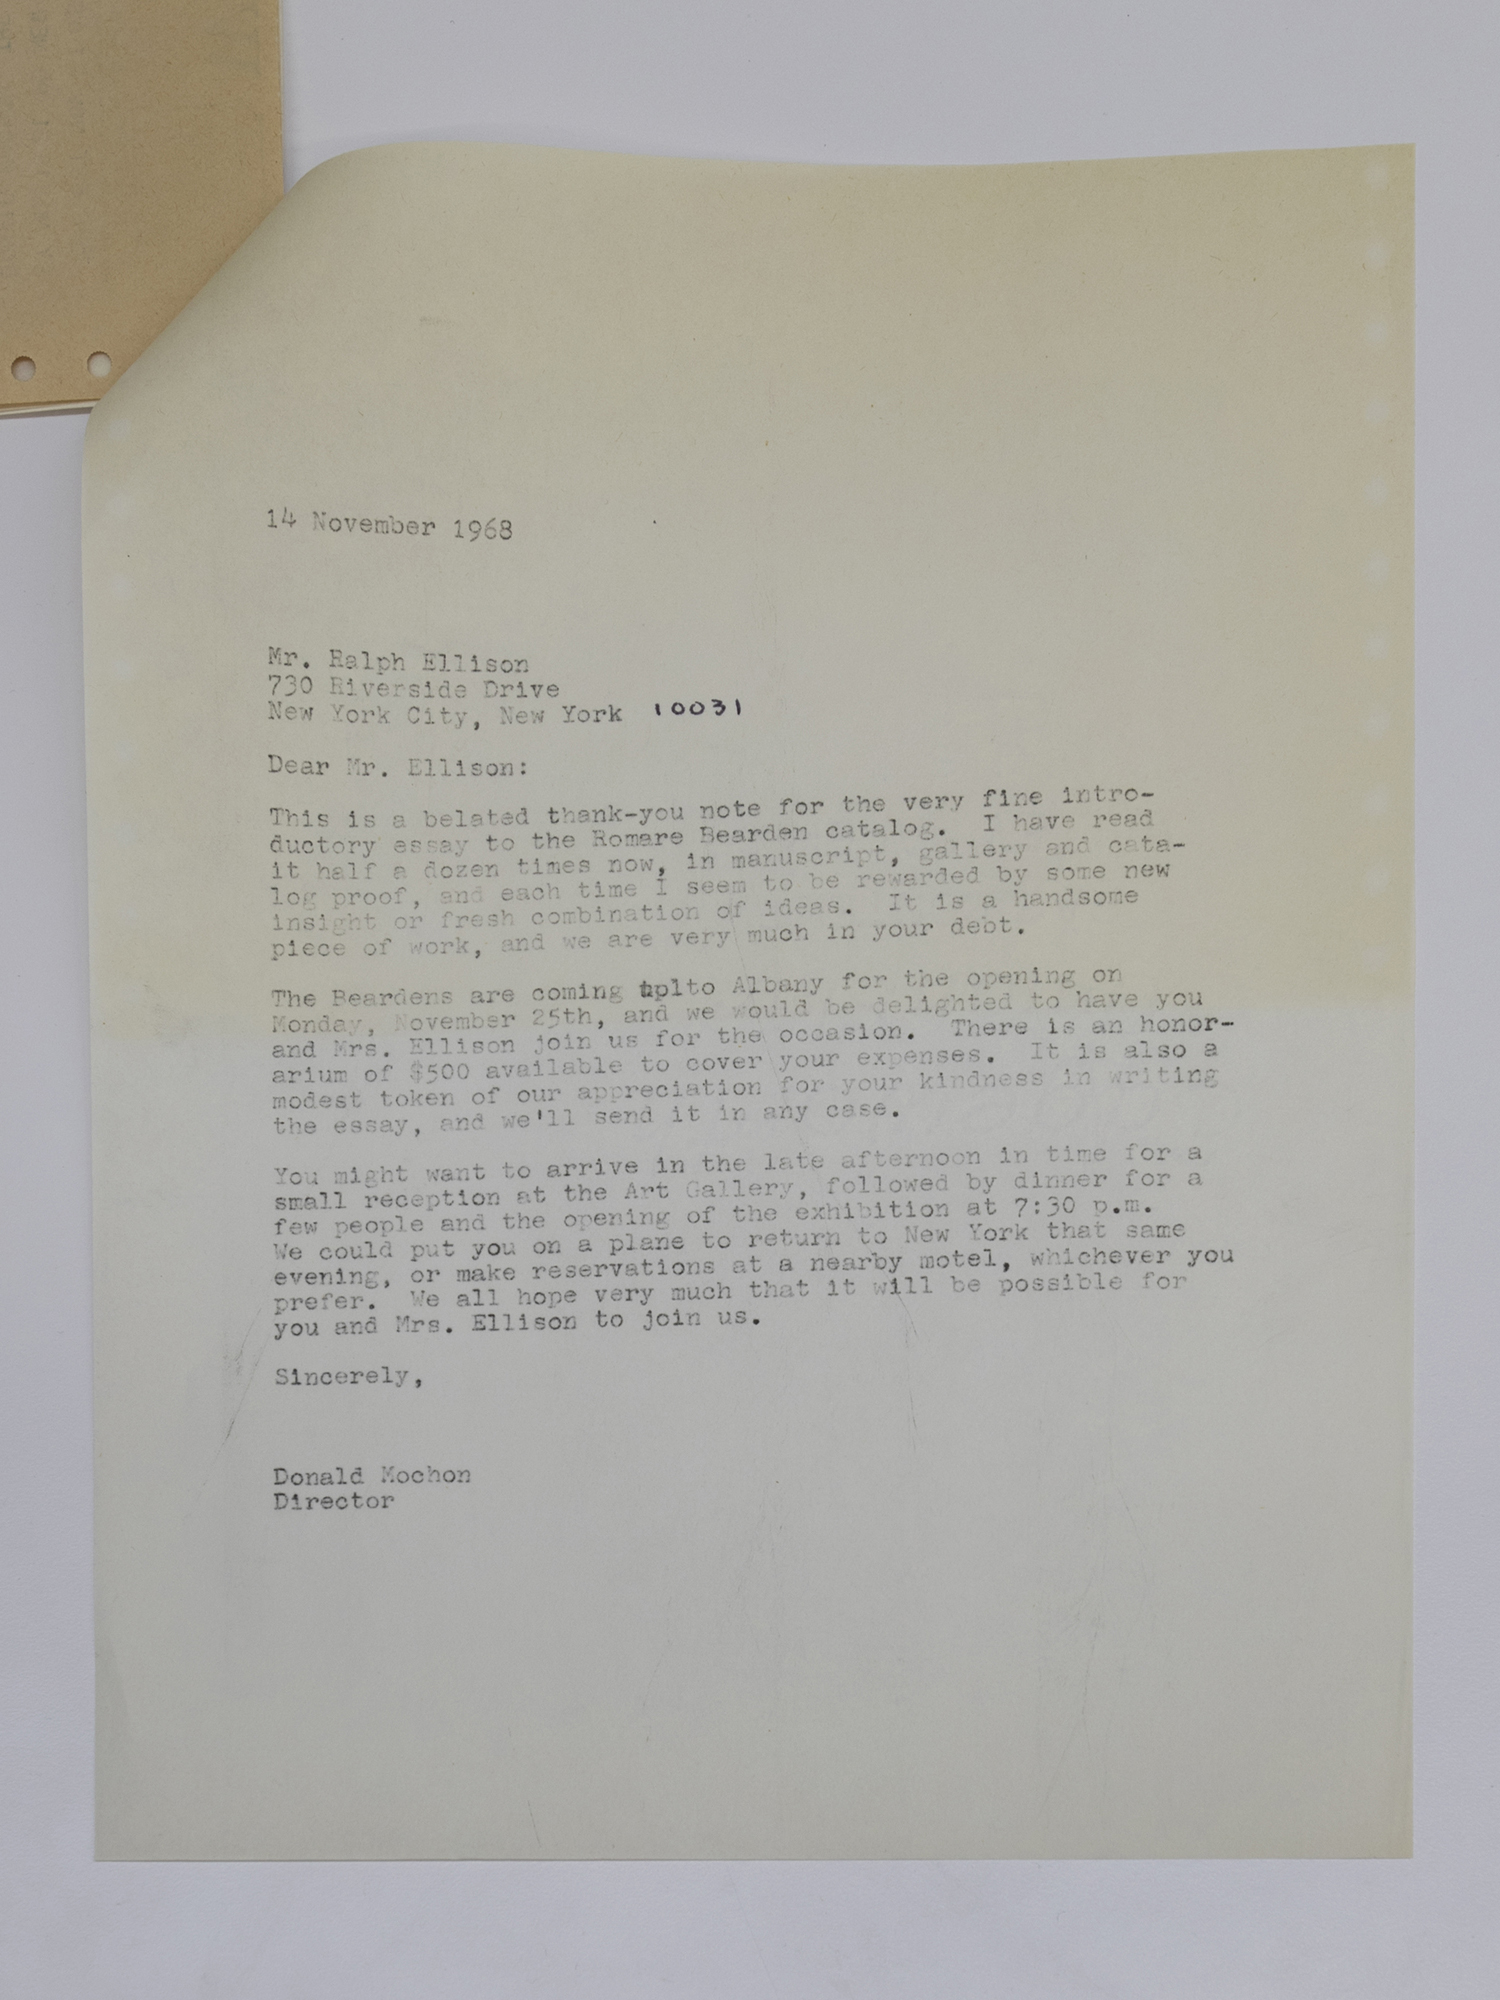 Scan of letters from Ralph Ellison to Donald Mochon, Director of the University Art Gallery